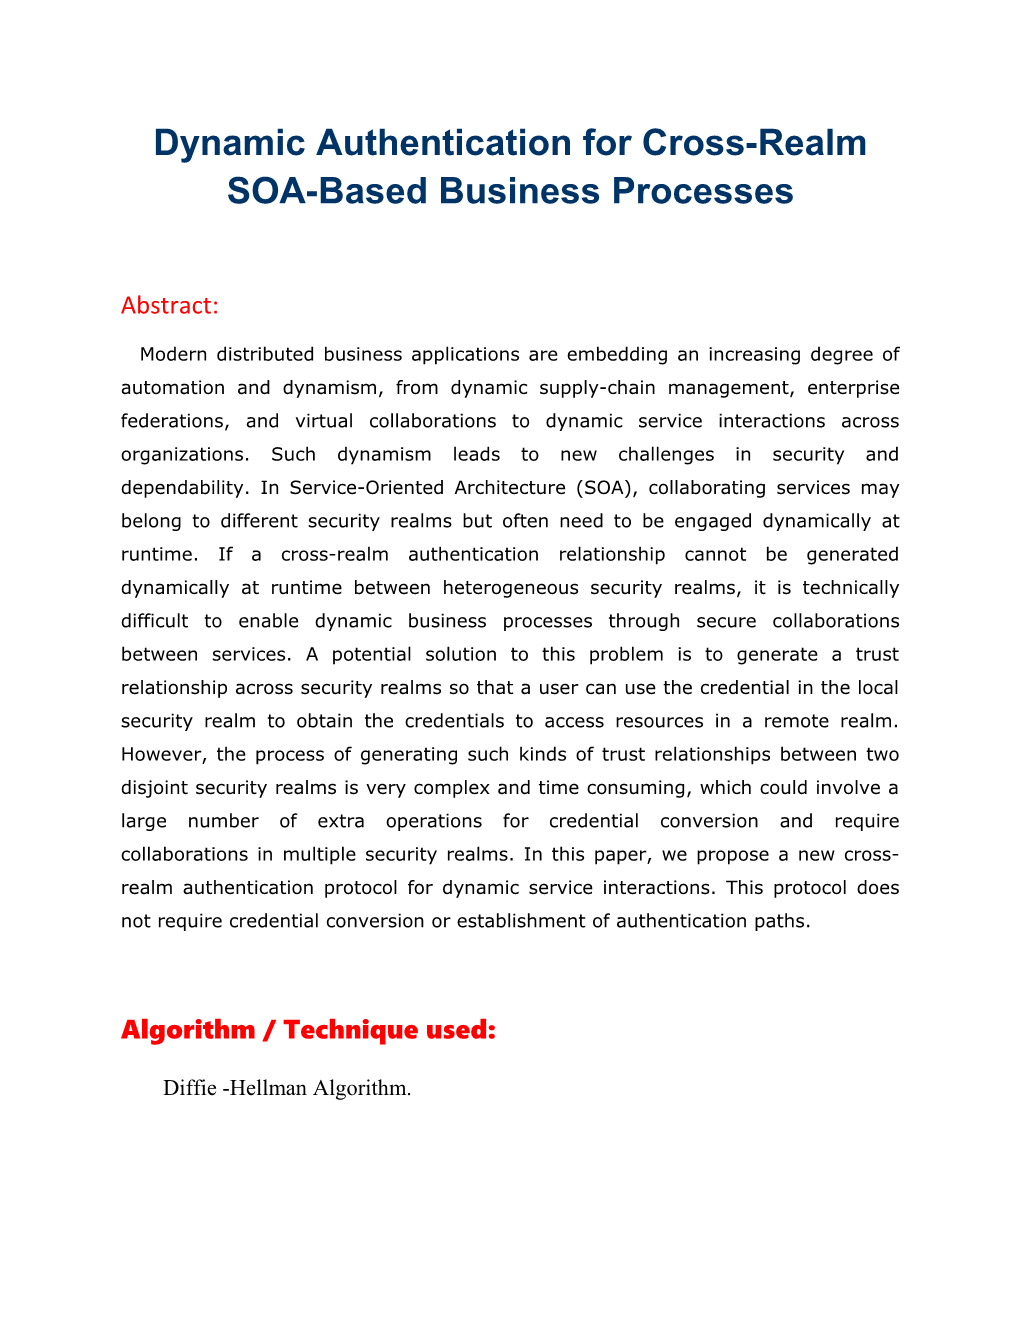 Dynamic Authentication for Cross-Realm SOA-Based Business Processes